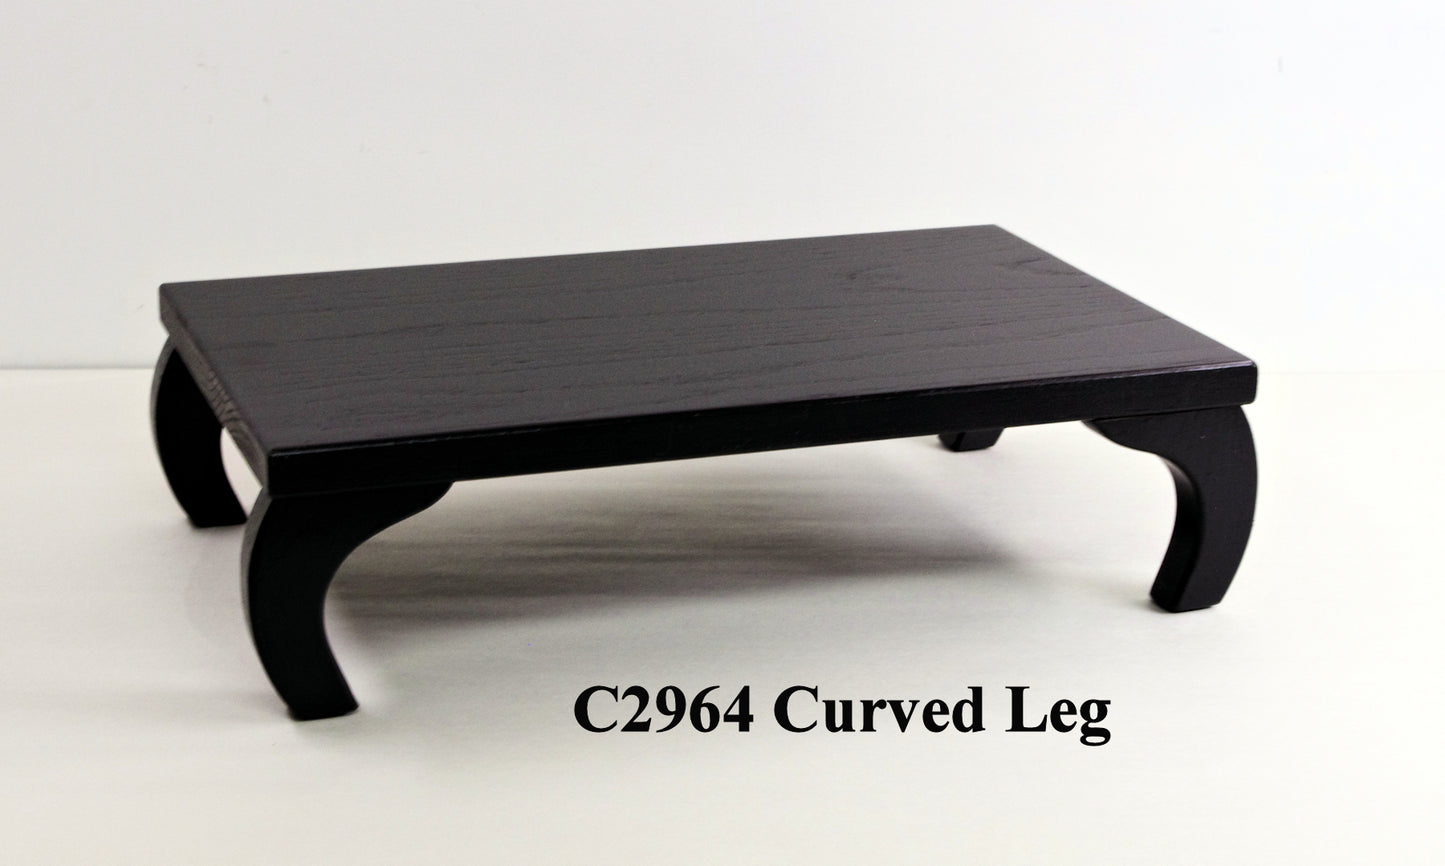 Bonsai Stand Curved Leg C2964 Made to Order 13" Length